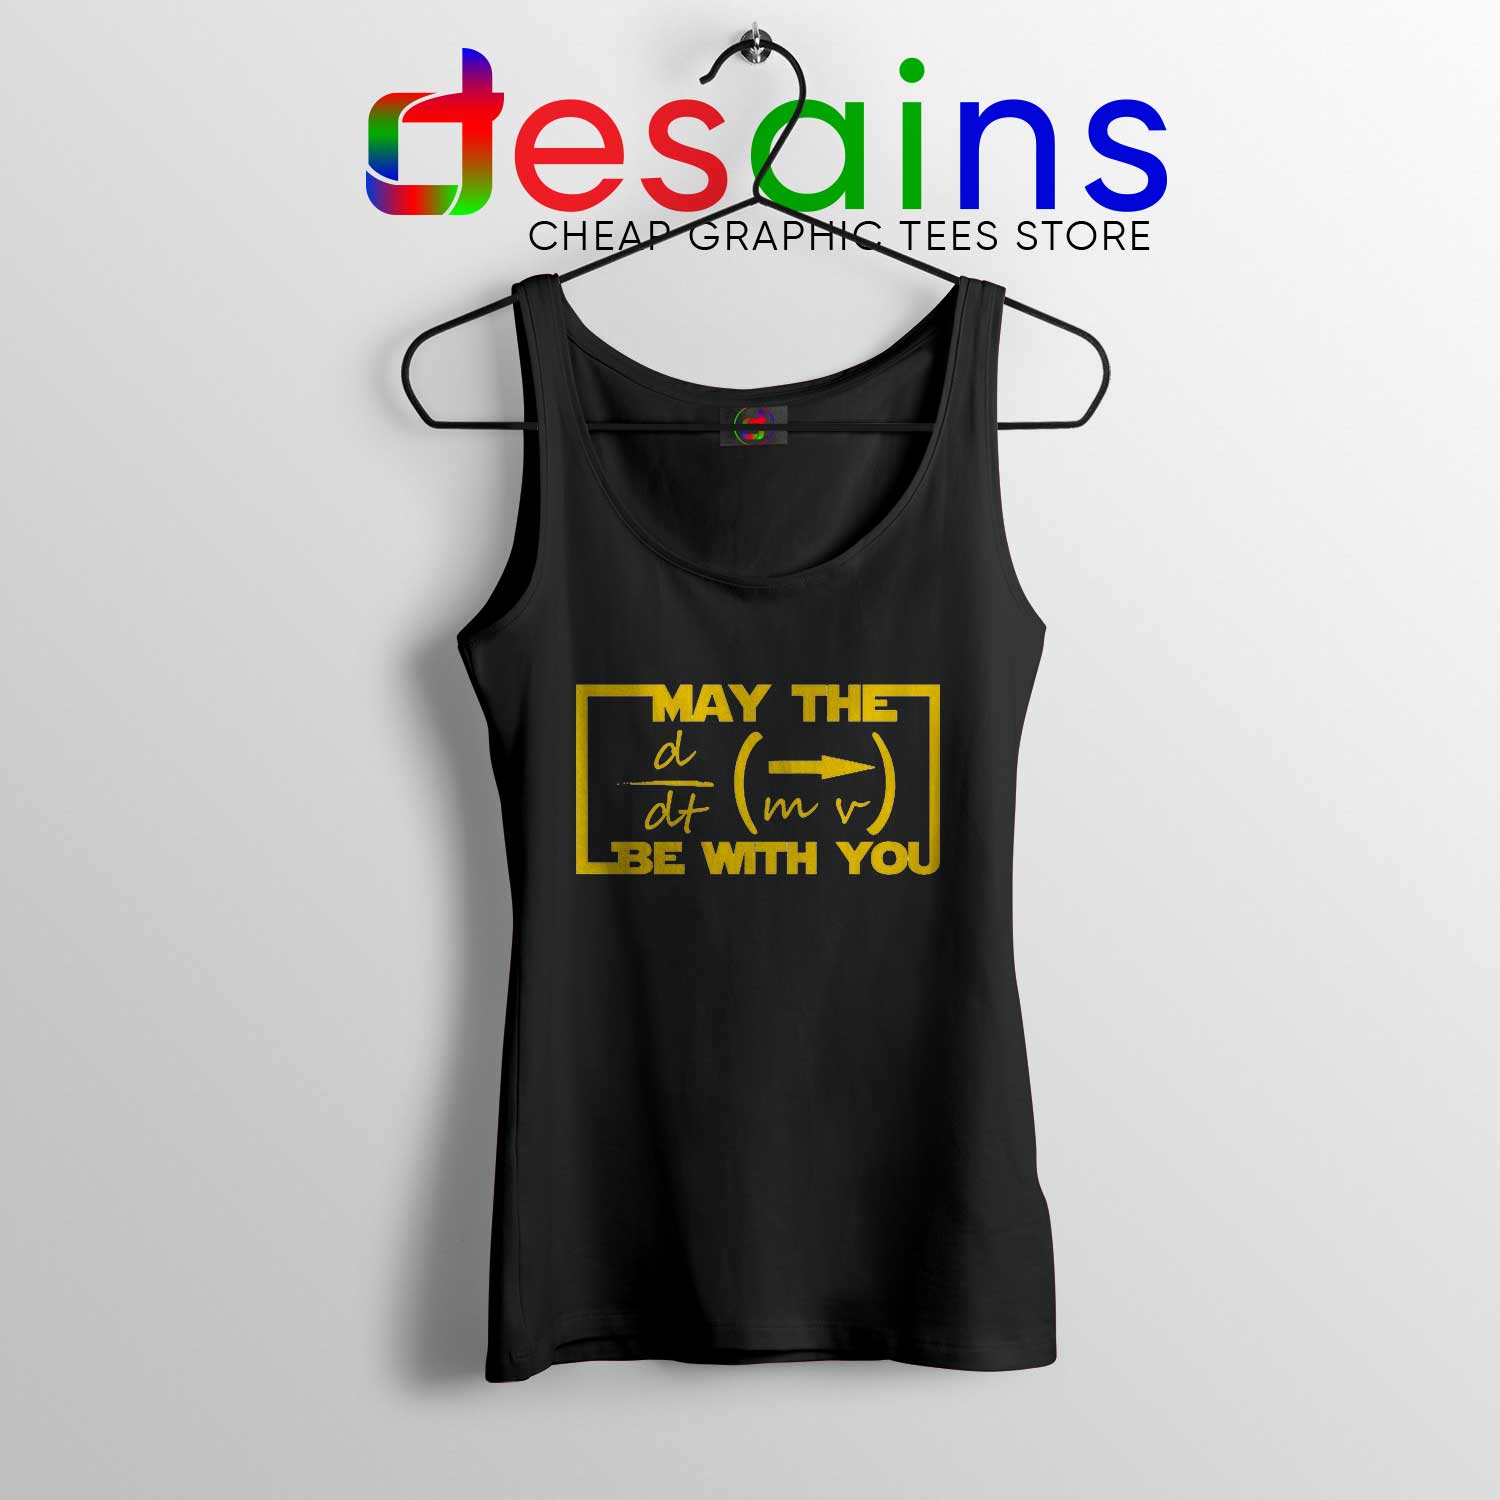 Gewend Of muziek May the Equation Be with You Tank Top Star Wars Quotes - DESAINS.COM